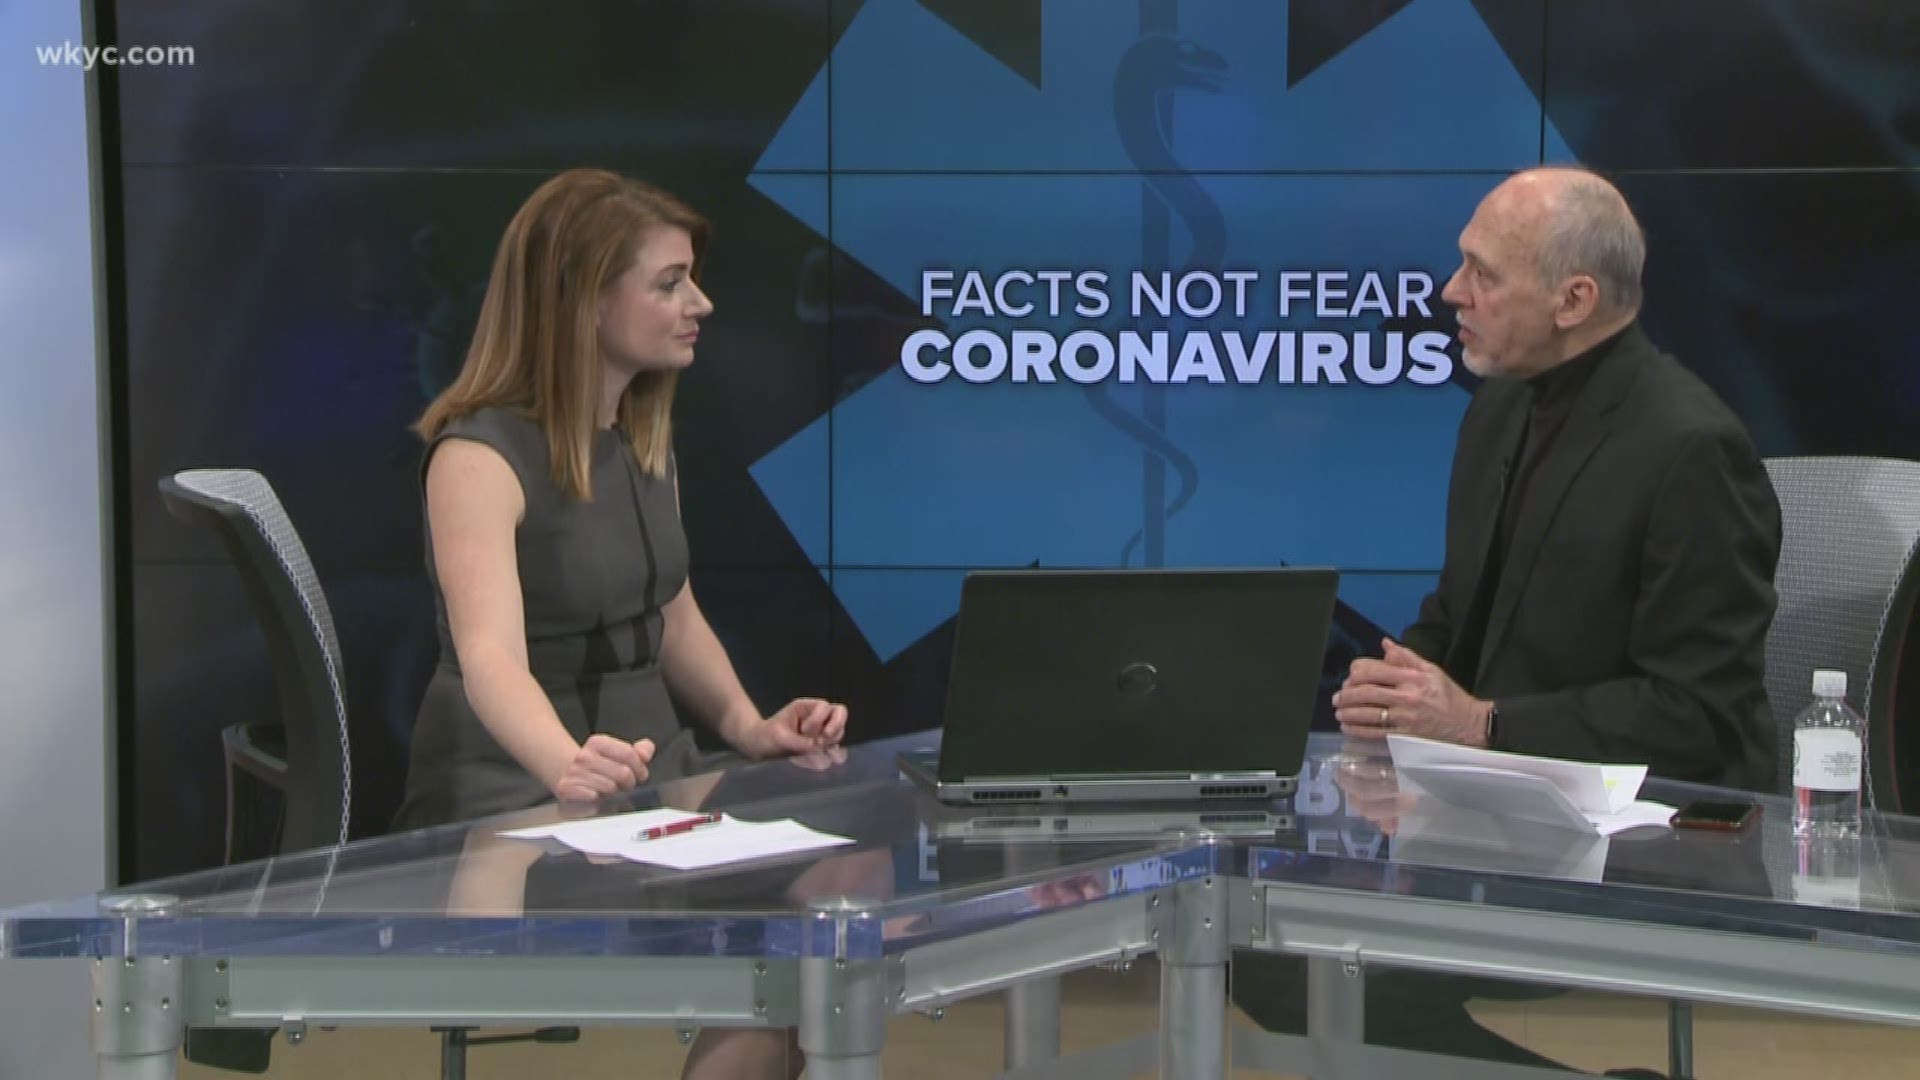 What symptoms should you watch for when it comes to coronavirus? What about your upcoming spring break vacation? Dr. Sroka answers your questions.